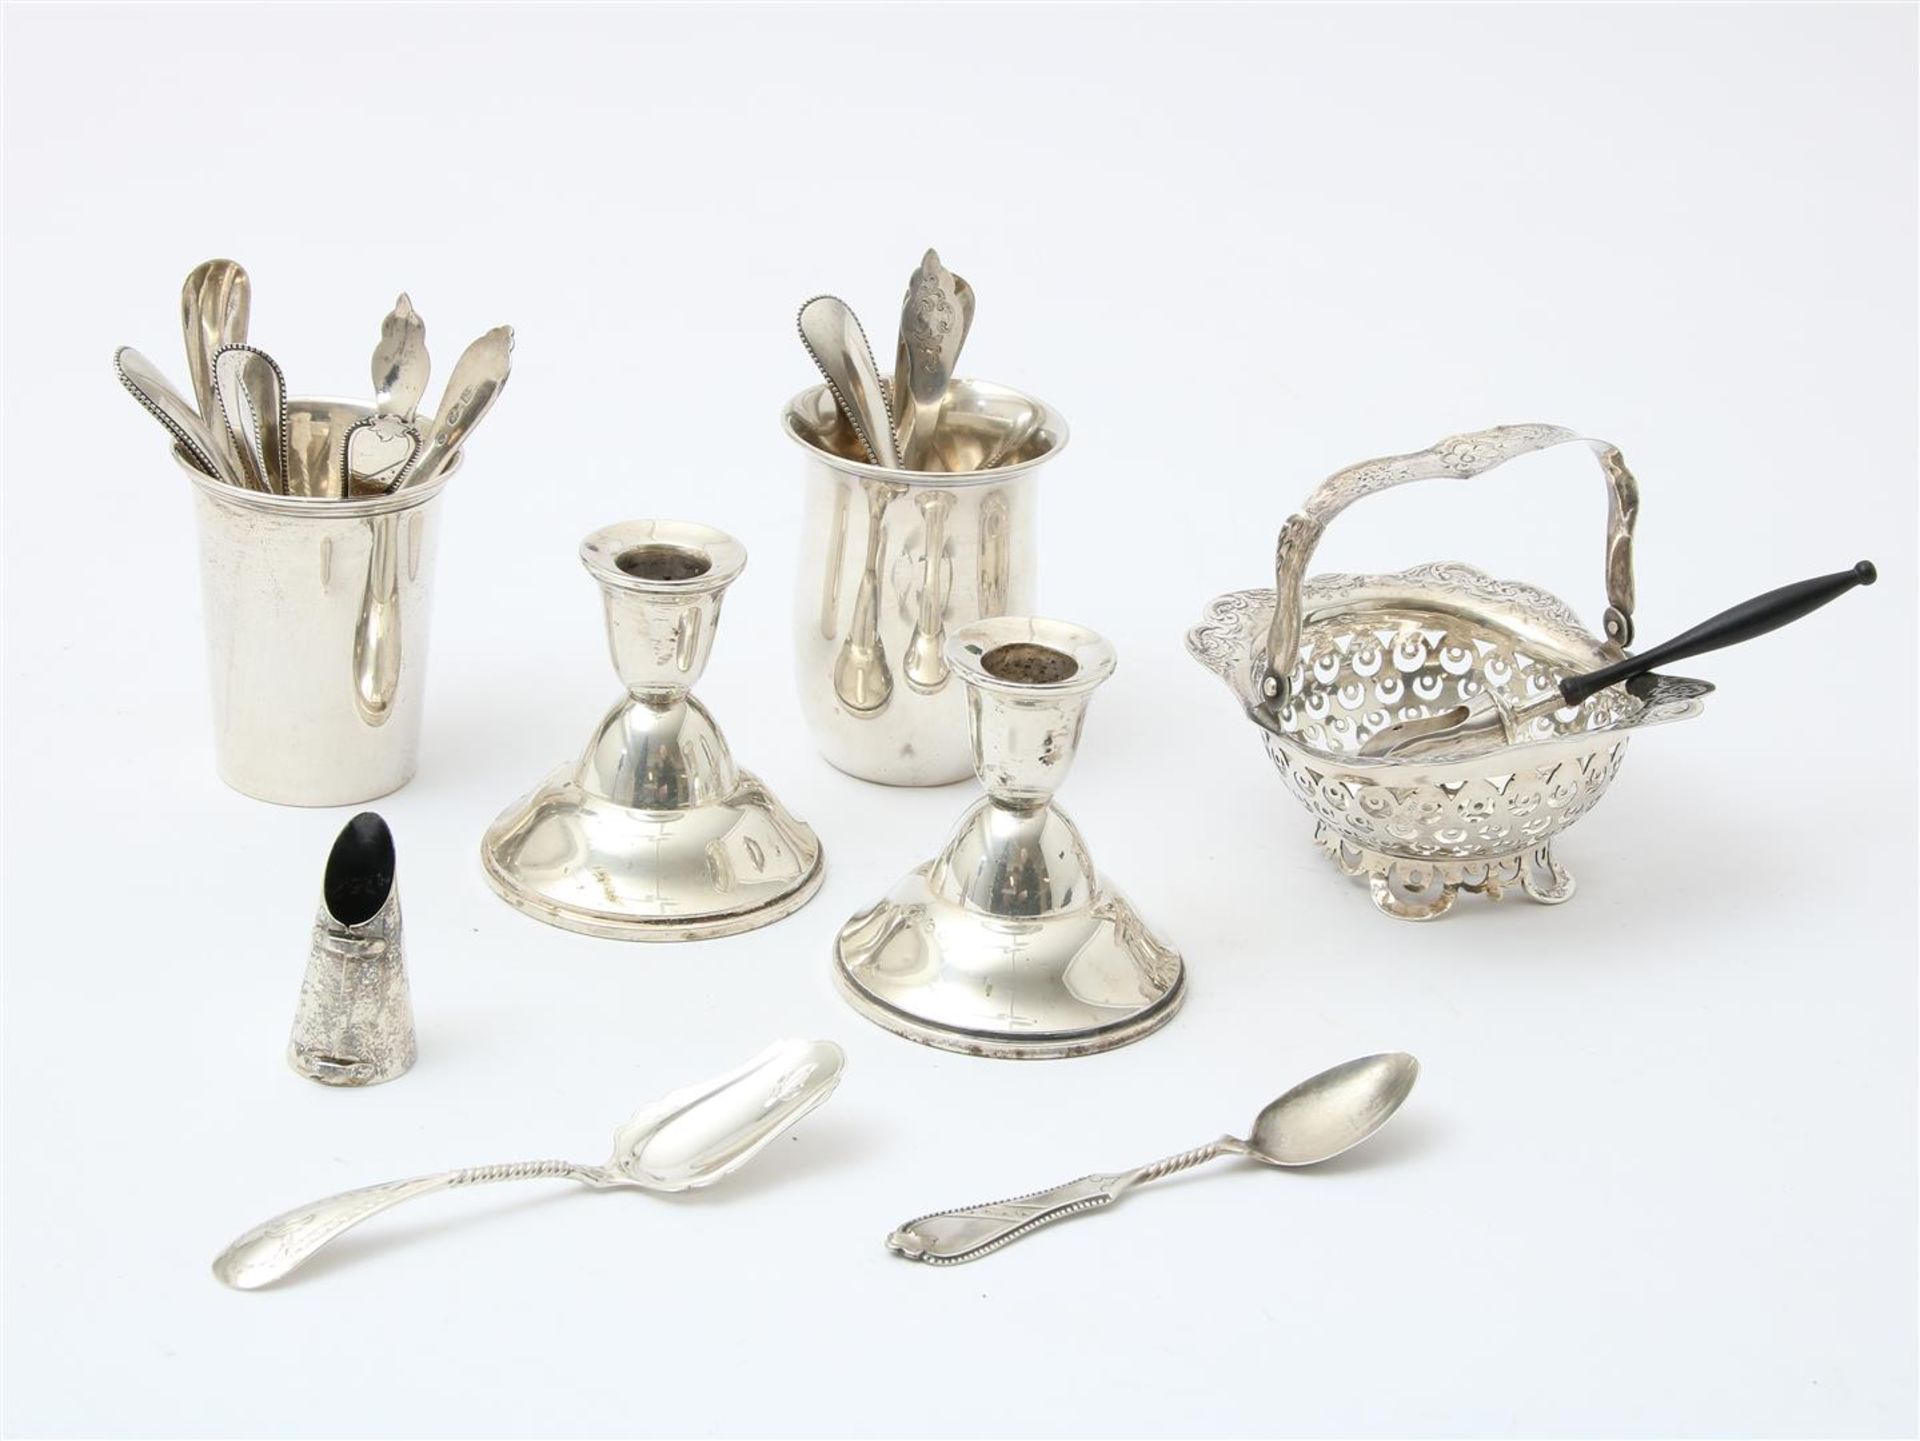 Lot of silverware including 2 cups, 2 single-light candlesticks, teaspoons, candy tray (size